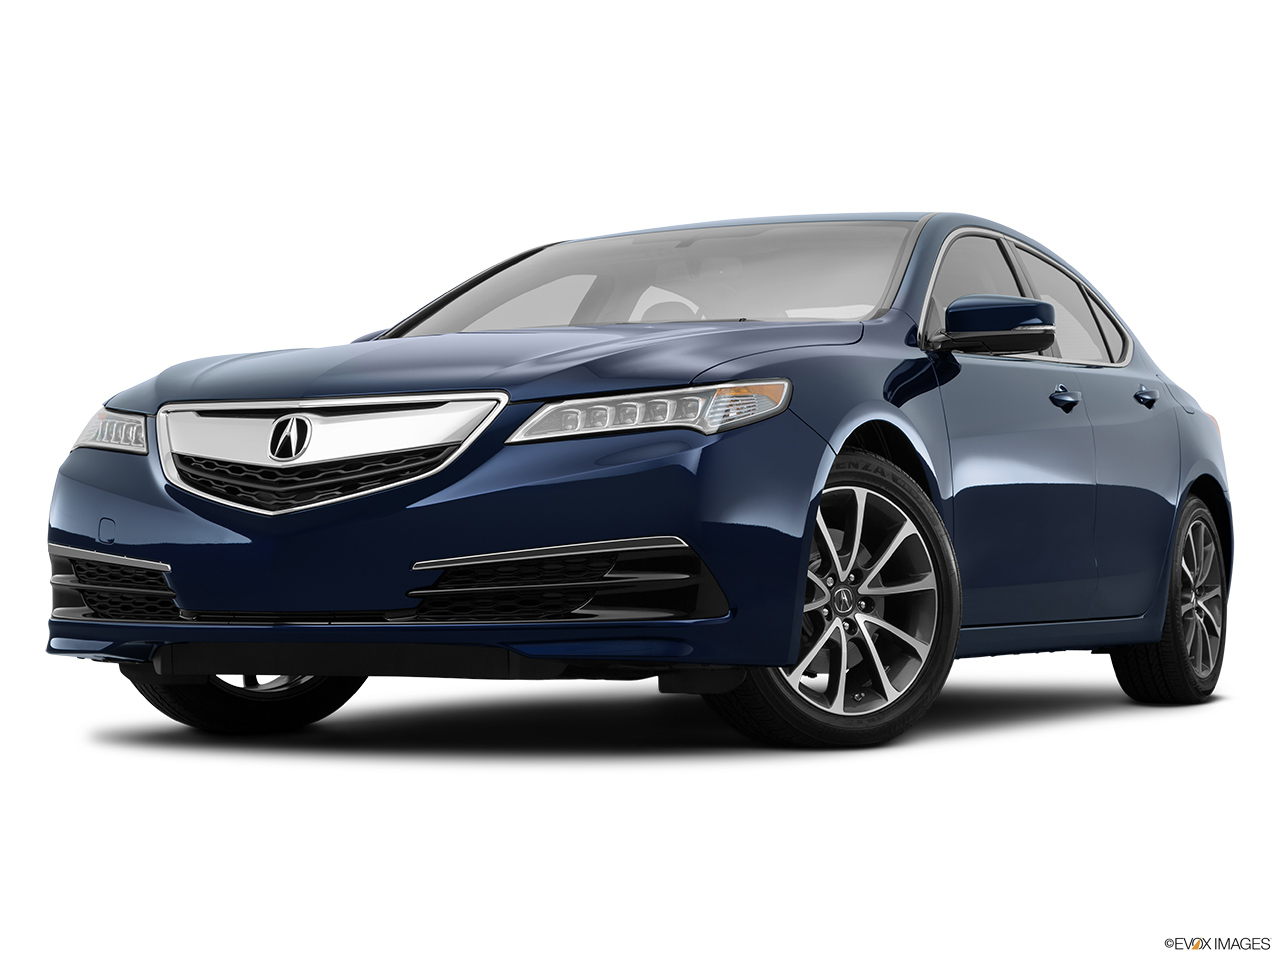 2015 Acura TLX 3.5 V-6 9-AT P-AWS Front angle view, low wide perspective. 